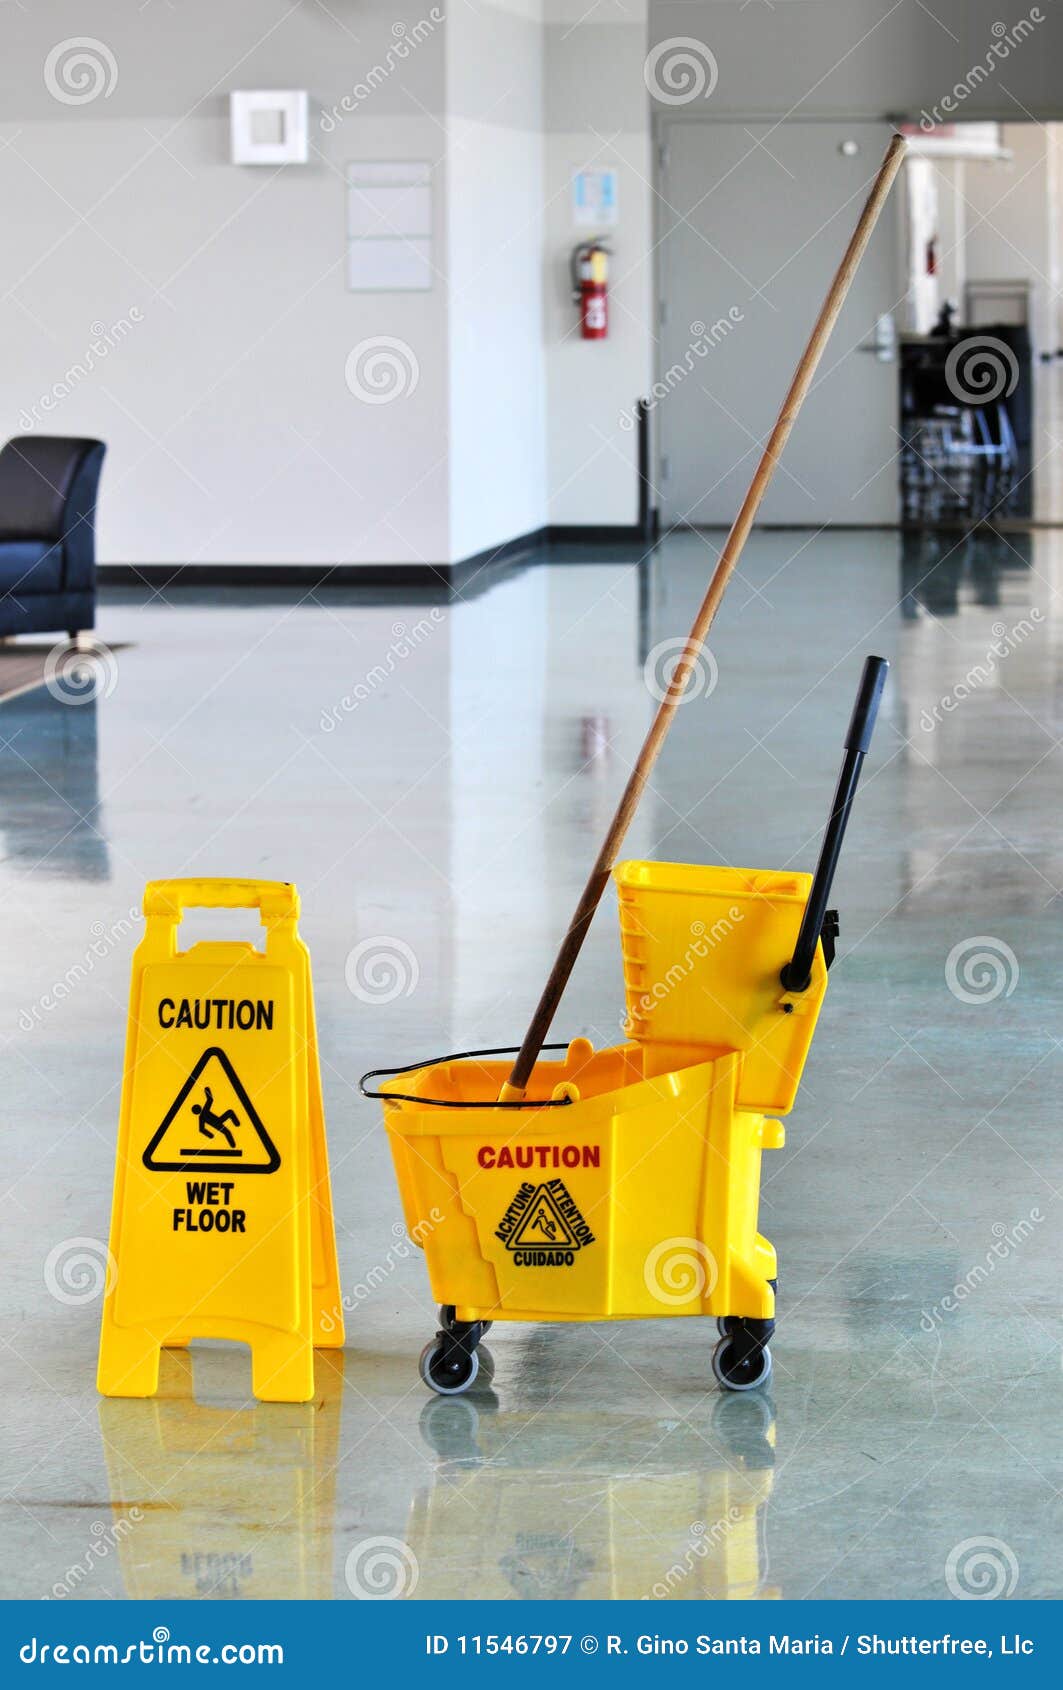 mop and bucket with caution sign